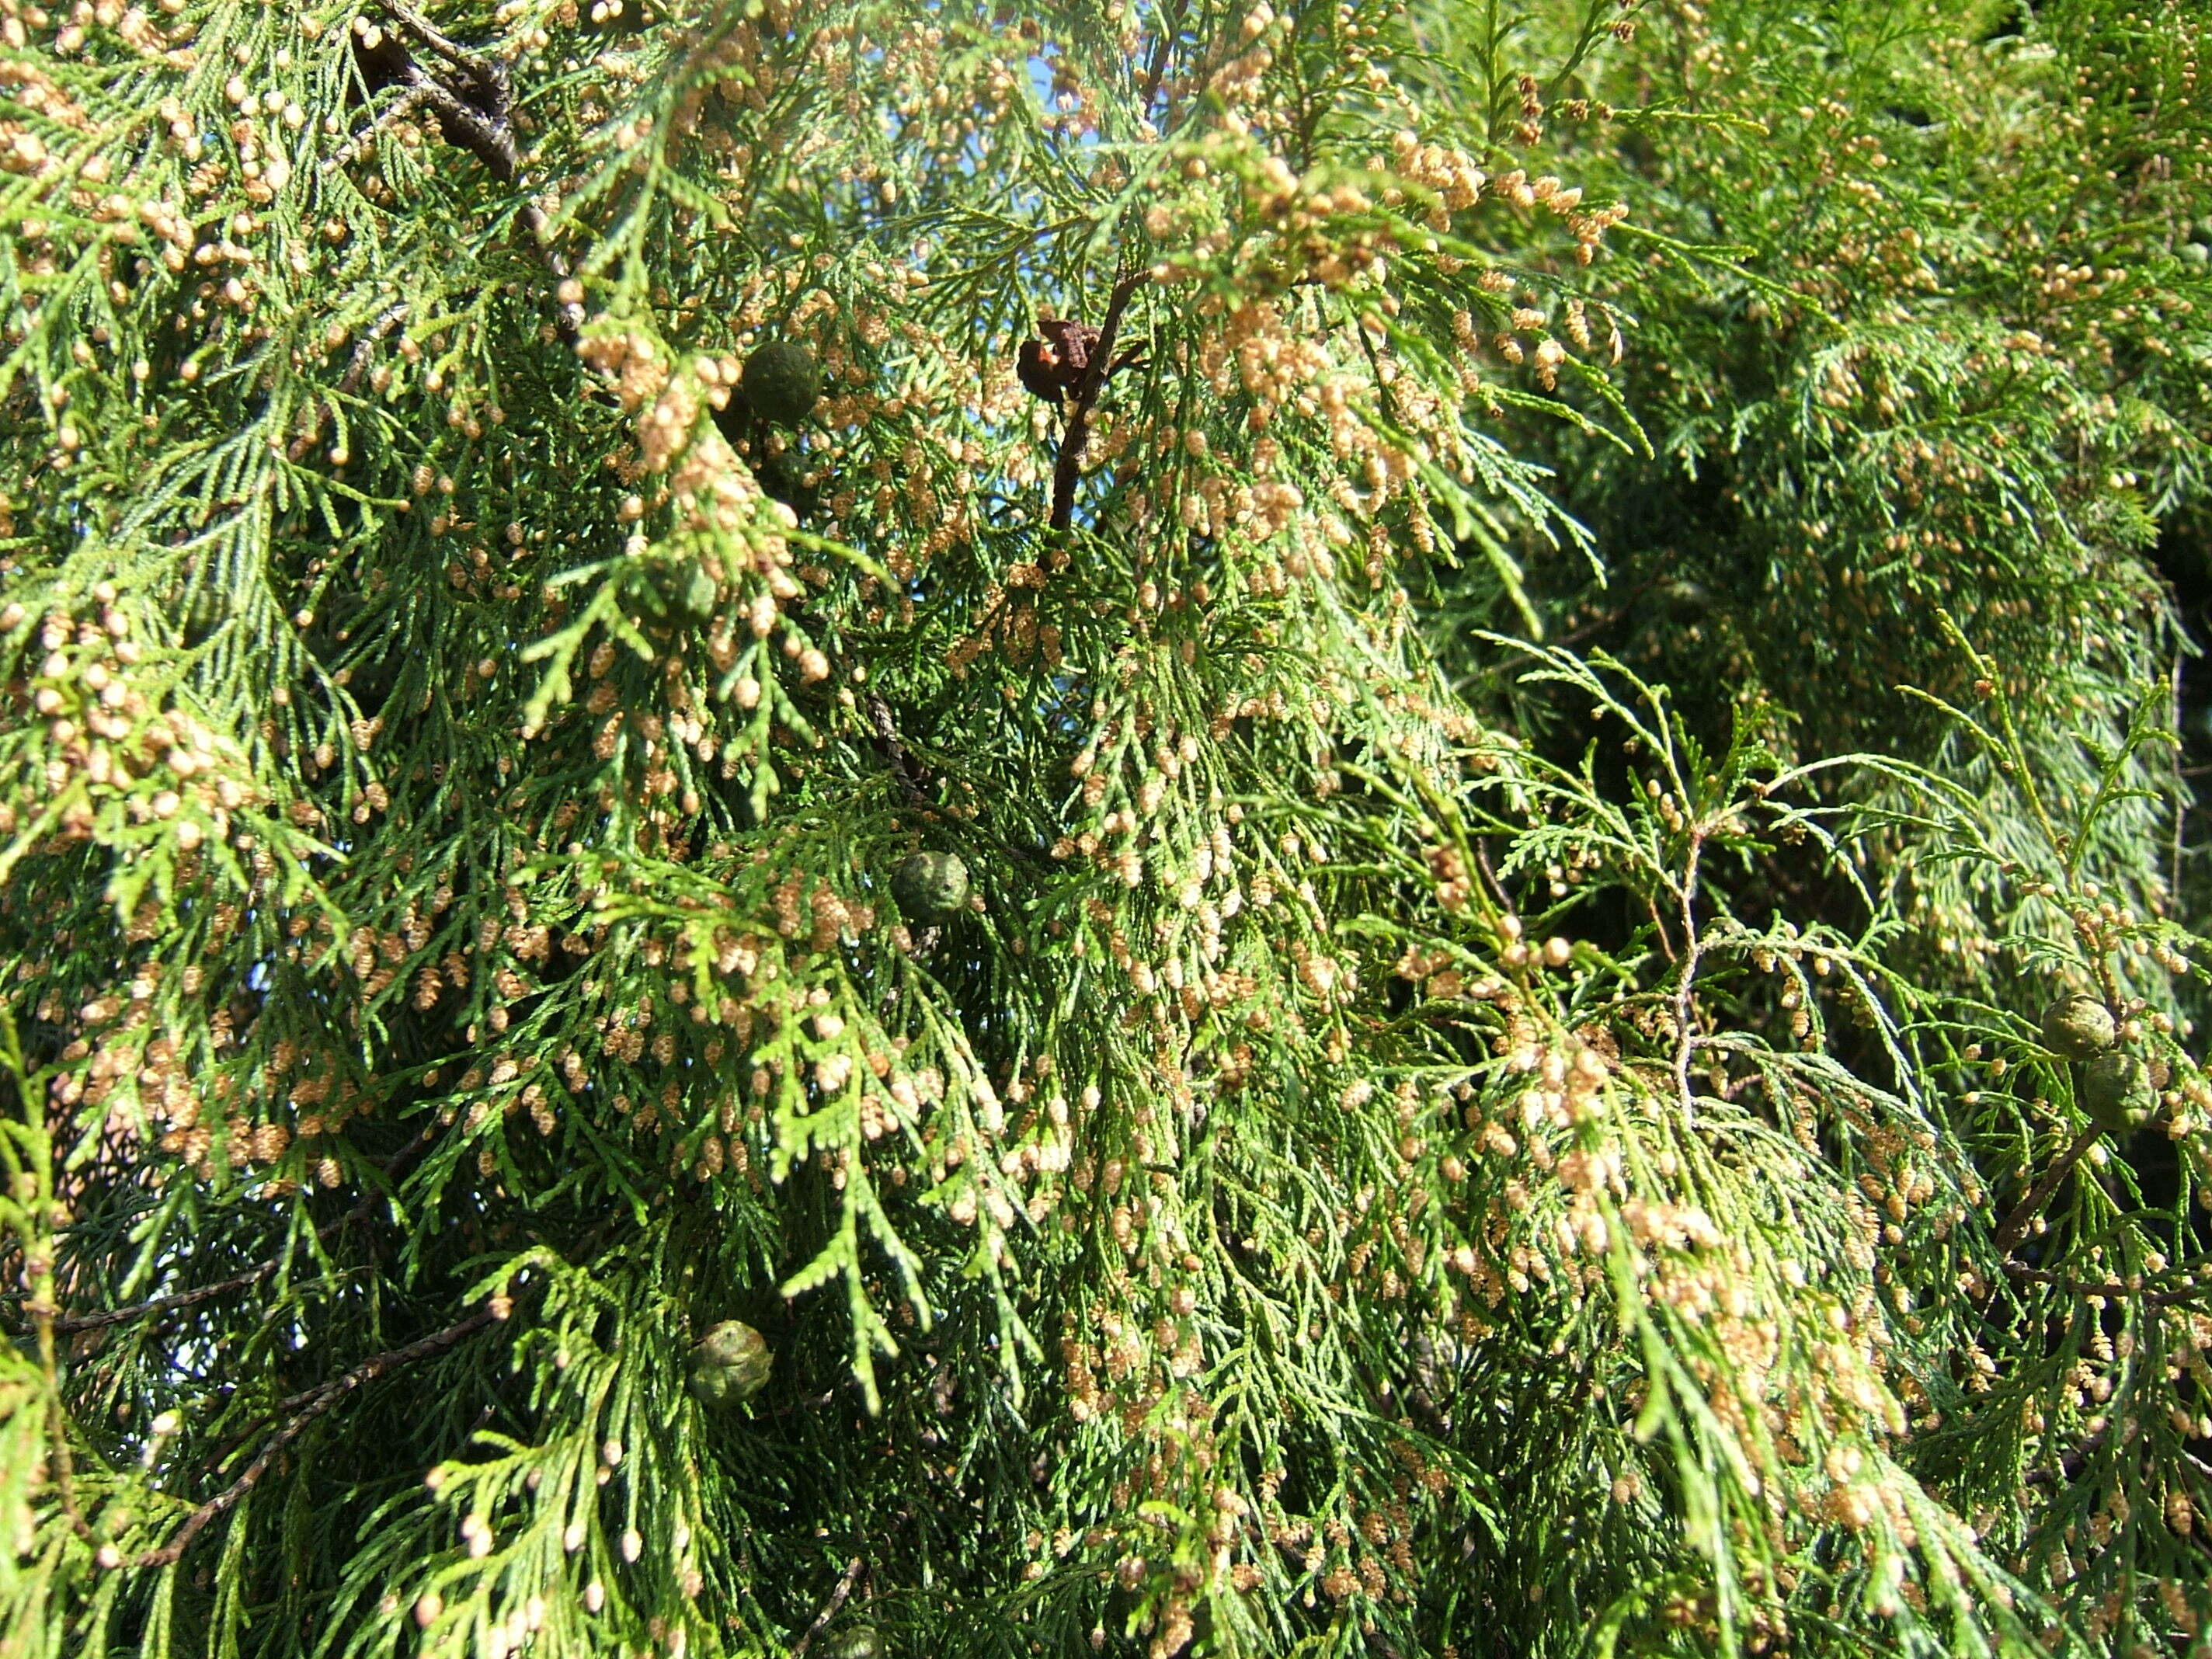 Image of Chinese Weeping Cypress